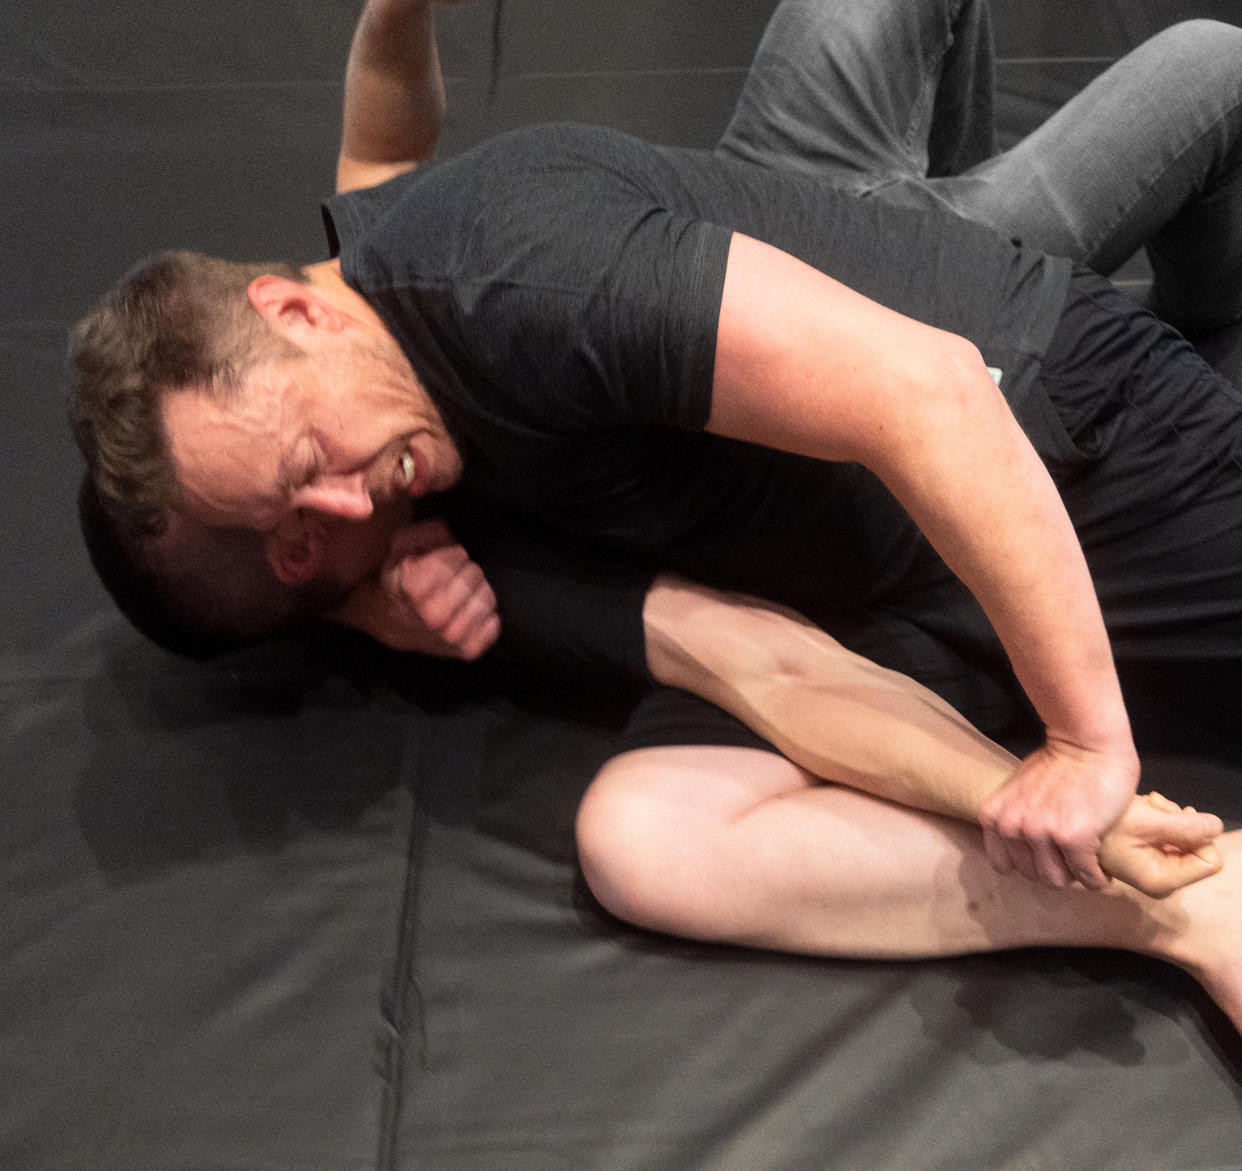 Tesla CEO Elon Musk has a jujitsu training session. (Photo by Lex Fridman, posted on X, formerly known as Twitter)